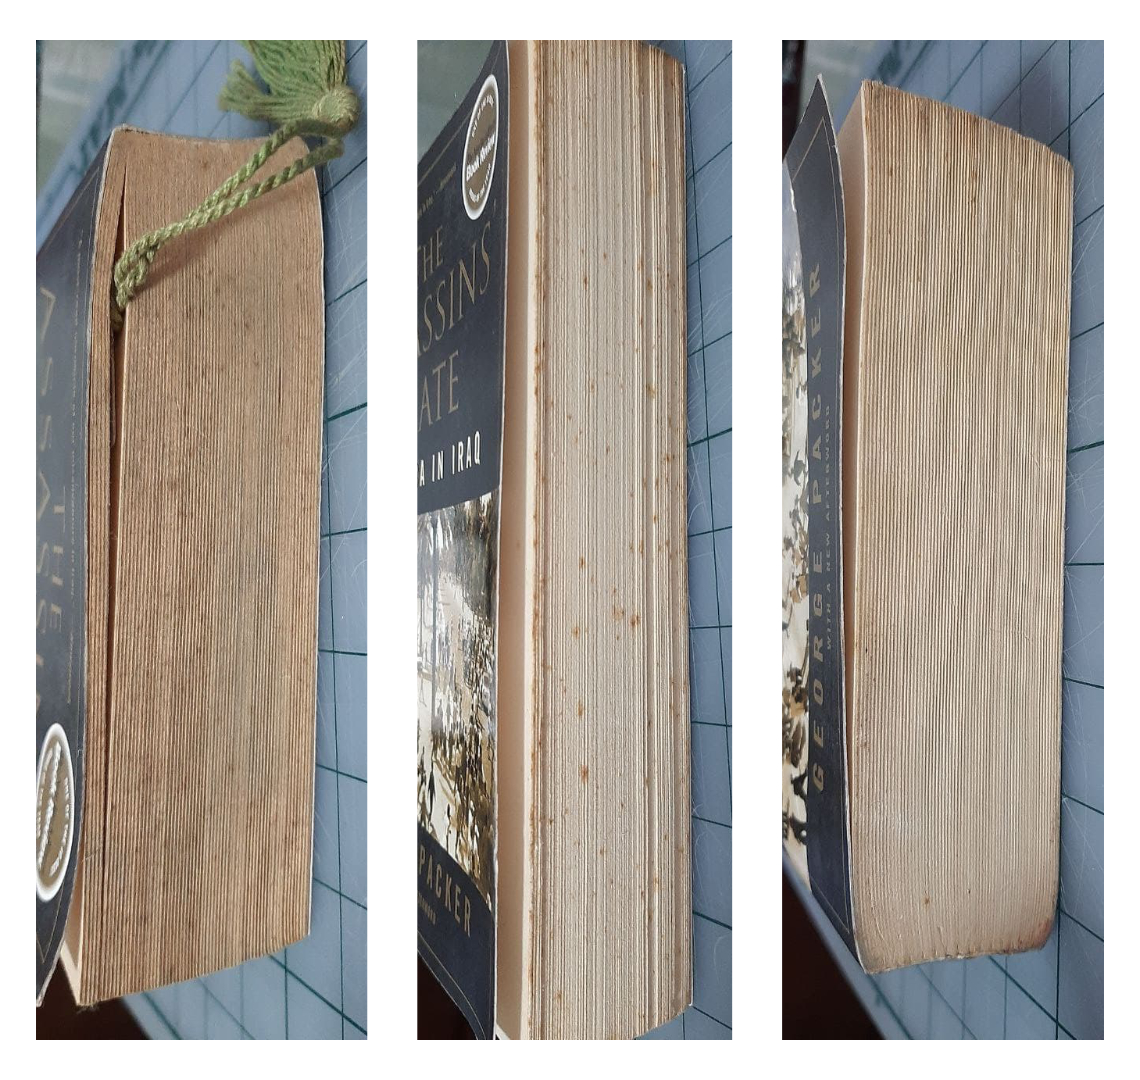 Three images of the top, side and bottom of a book showing differential damage.